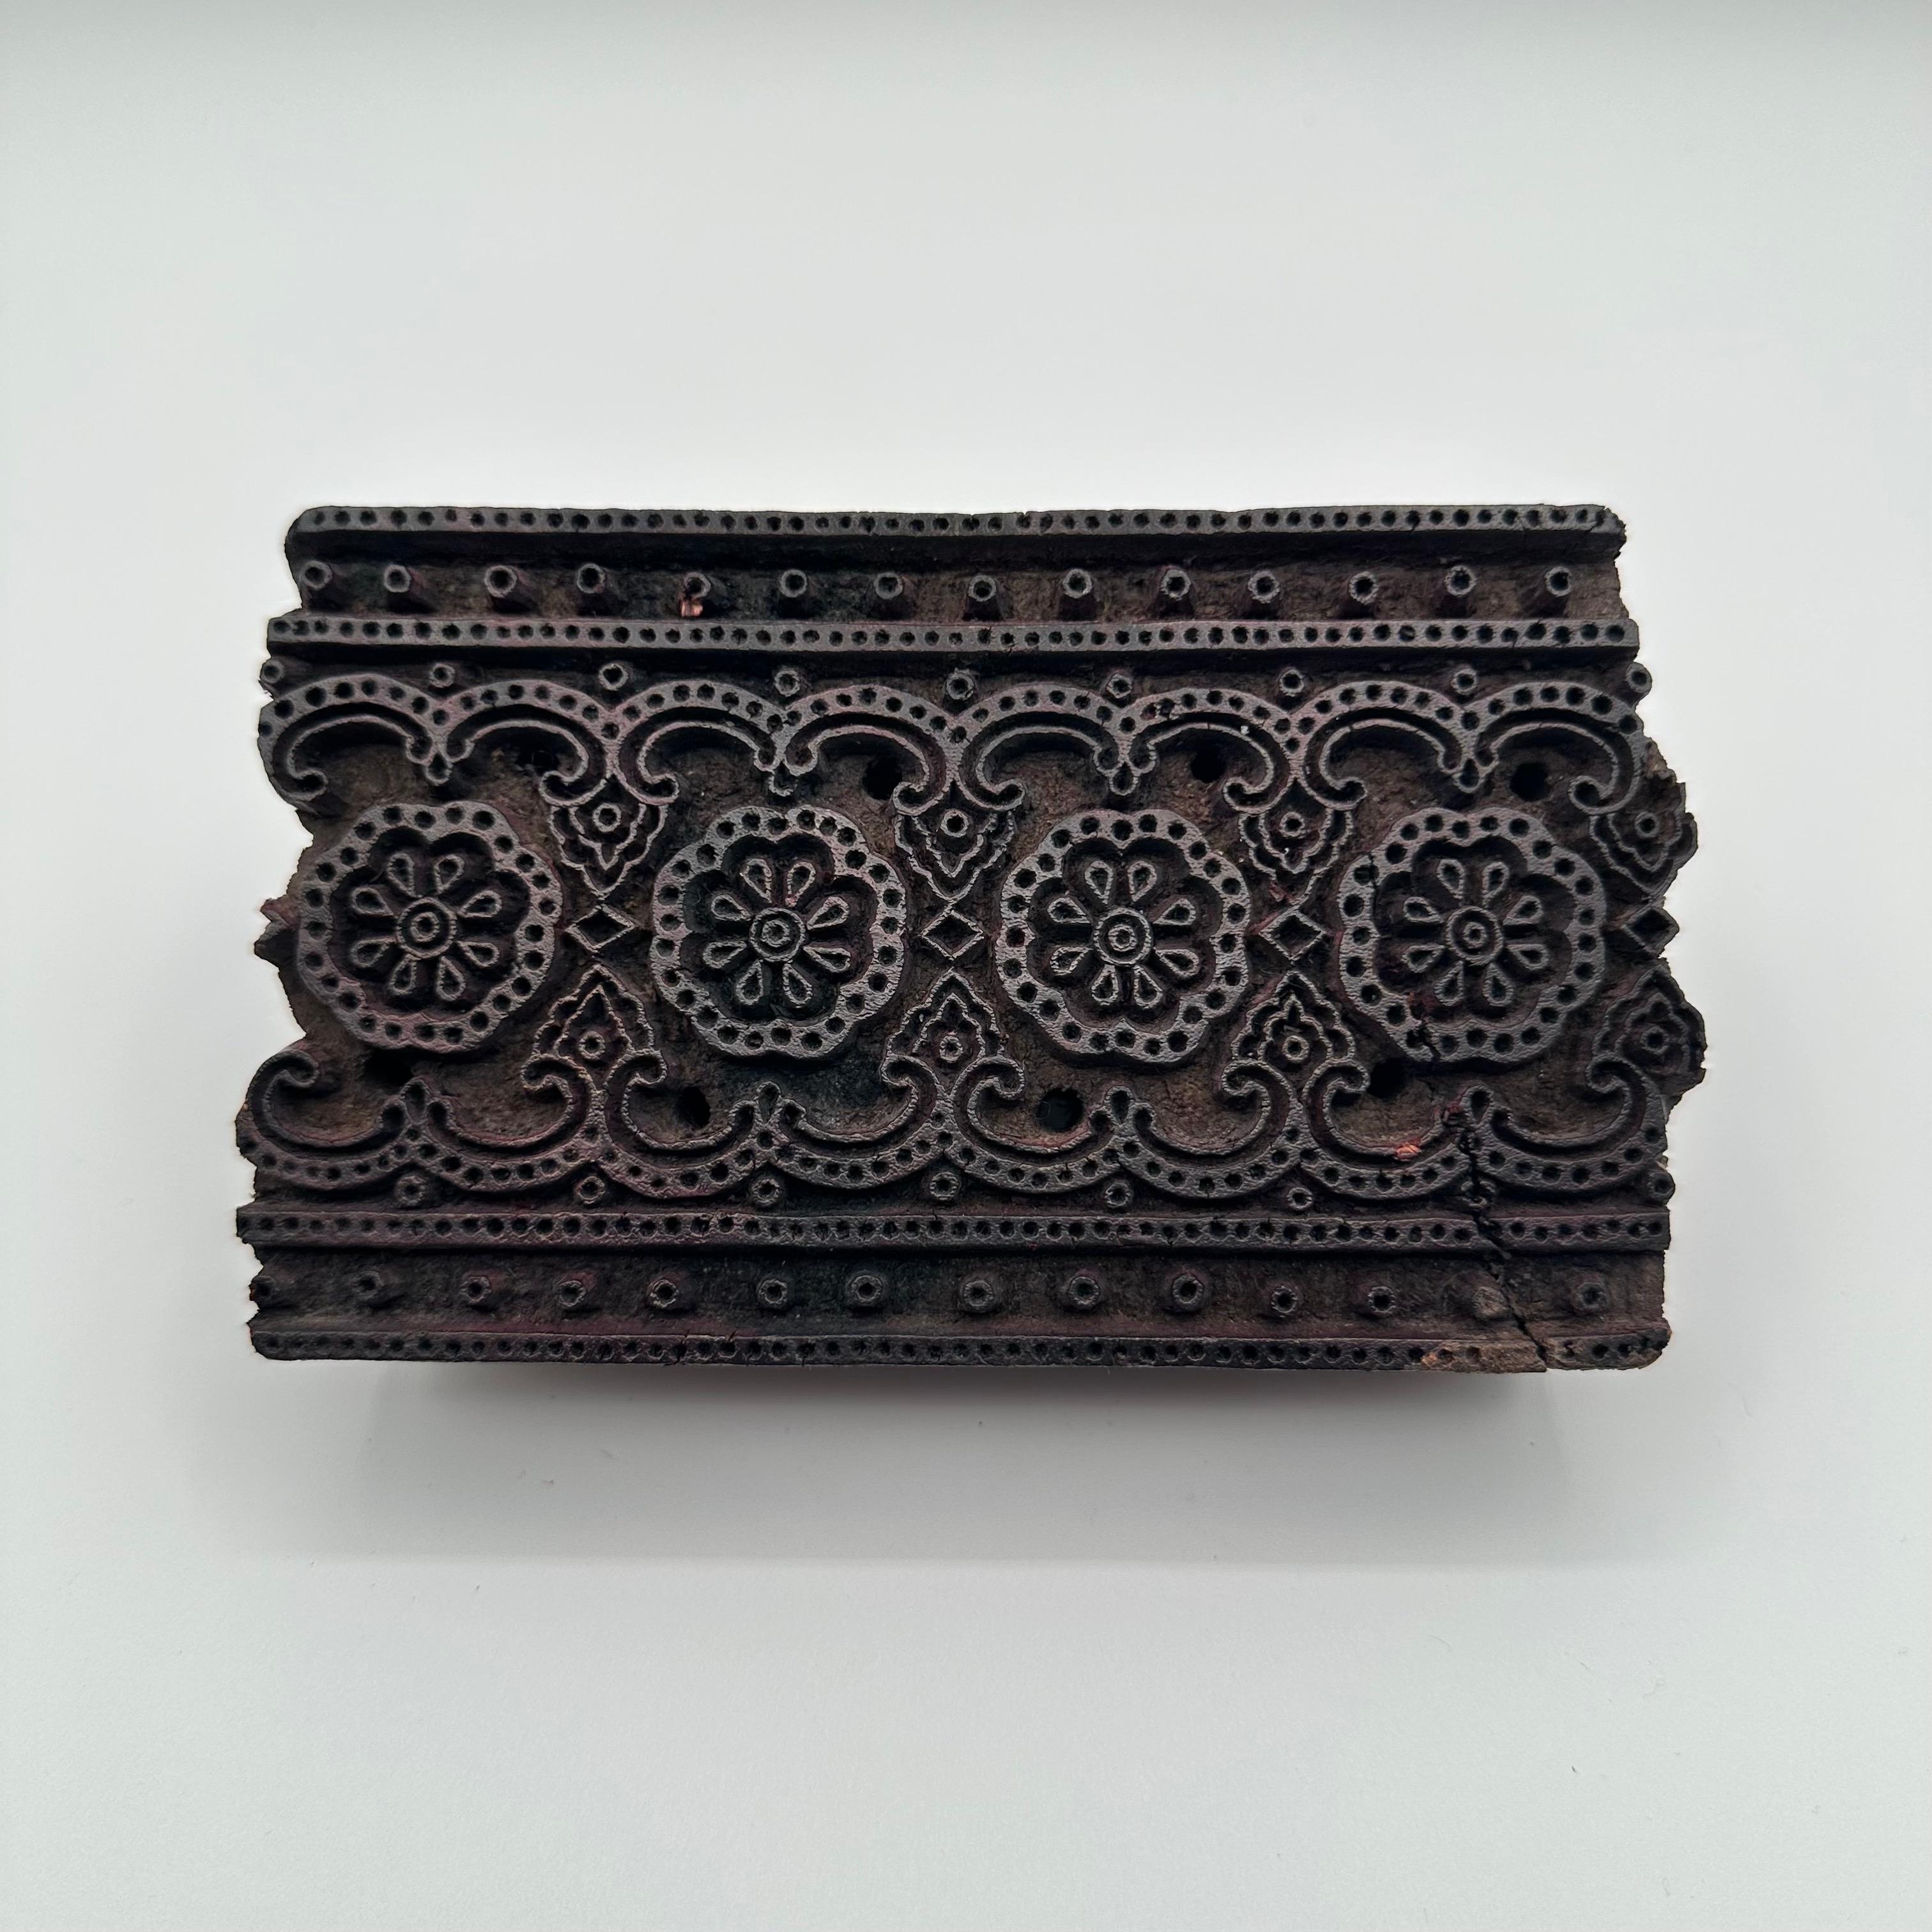 Antique Hand Carved Wood Printing Block in Dark Rosette Pattern For Sale 10